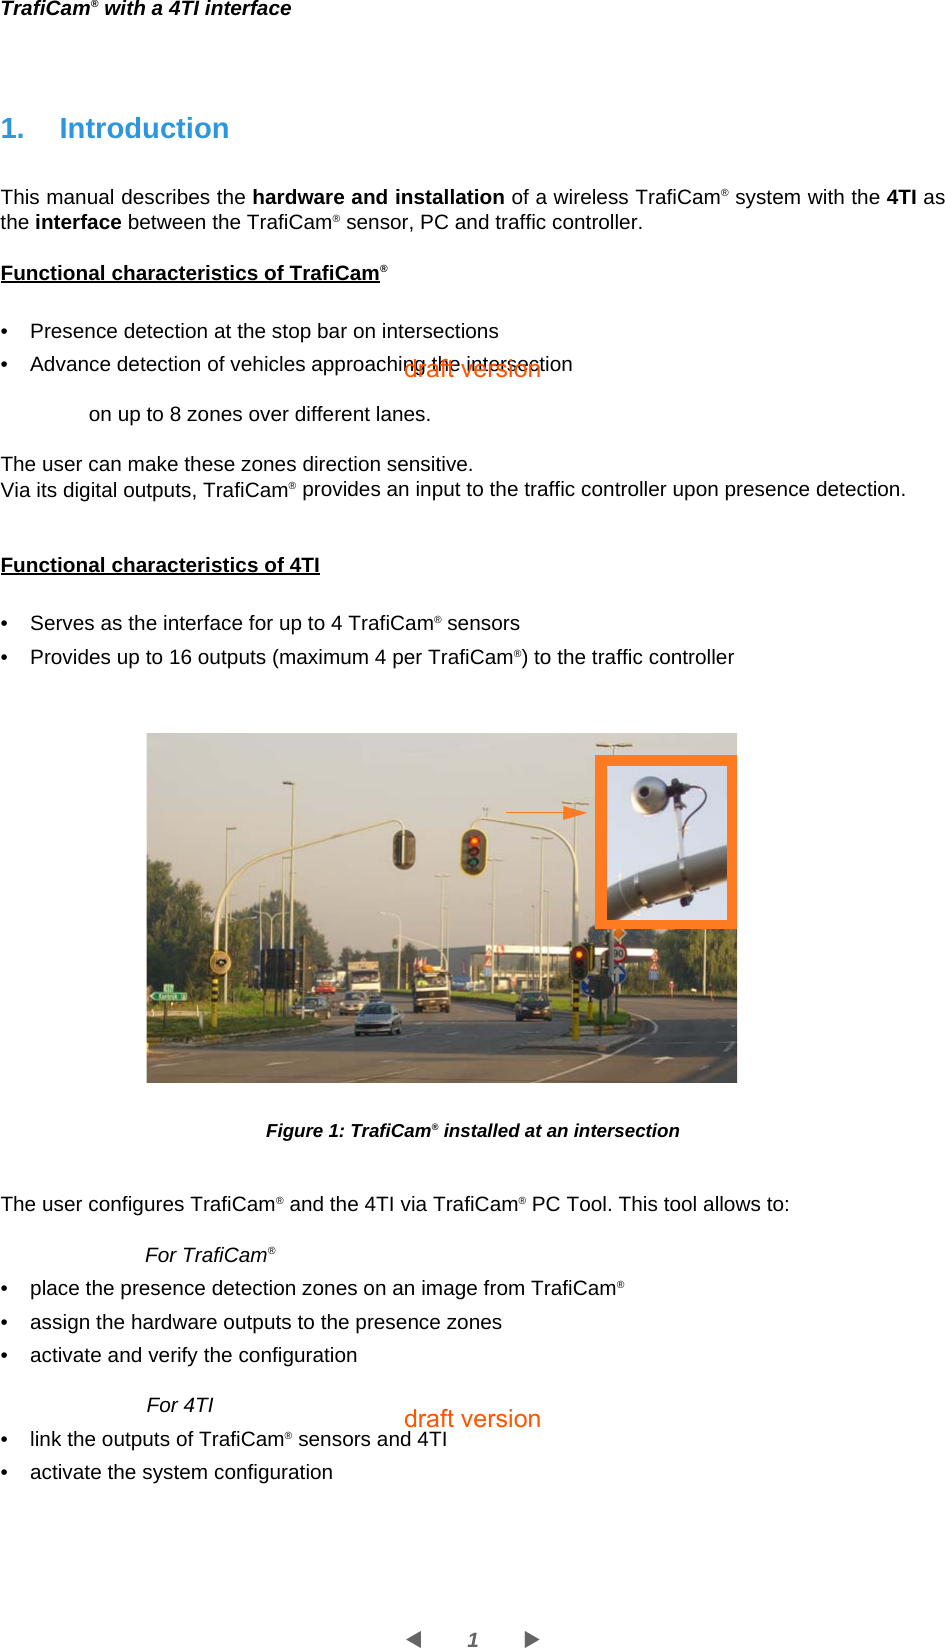 1WXTrafiCam® with a 4TI interface1. IntroductionThis manual describes the hardware and installation of a wireless TrafiCam® system with the 4TI as the interface between the TrafiCam® sensor, PC and traffic controller. Functional characteristics of TrafiCam®• Presence detection at the stop bar on intersections  • Advance detection of vehicles approaching the intersectionon up to 8 zones over different lanes. The user can make these zones direction sensitive.Via its digital outputs, TrafiCam® provides an input to the traffic controller upon presence detection. Functional characteristics of 4TI• Serves as the interface for up to 4 TrafiCam® sensors• Provides up to 16 outputs (maximum 4 per TrafiCam®) to the traffic controllerFigure 1: TrafiCam® installed at an intersectionThe user configures TrafiCam® and the 4TI via TrafiCam® PC Tool. This tool allows to:For TrafiCam®• place the presence detection zones on an image from TrafiCam®• assign the hardware outputs to the presence zones• activate and verify the configurationFor 4TI• link the outputs of TrafiCam® sensors and 4TI• activate the system configurationdraft versiondraft version